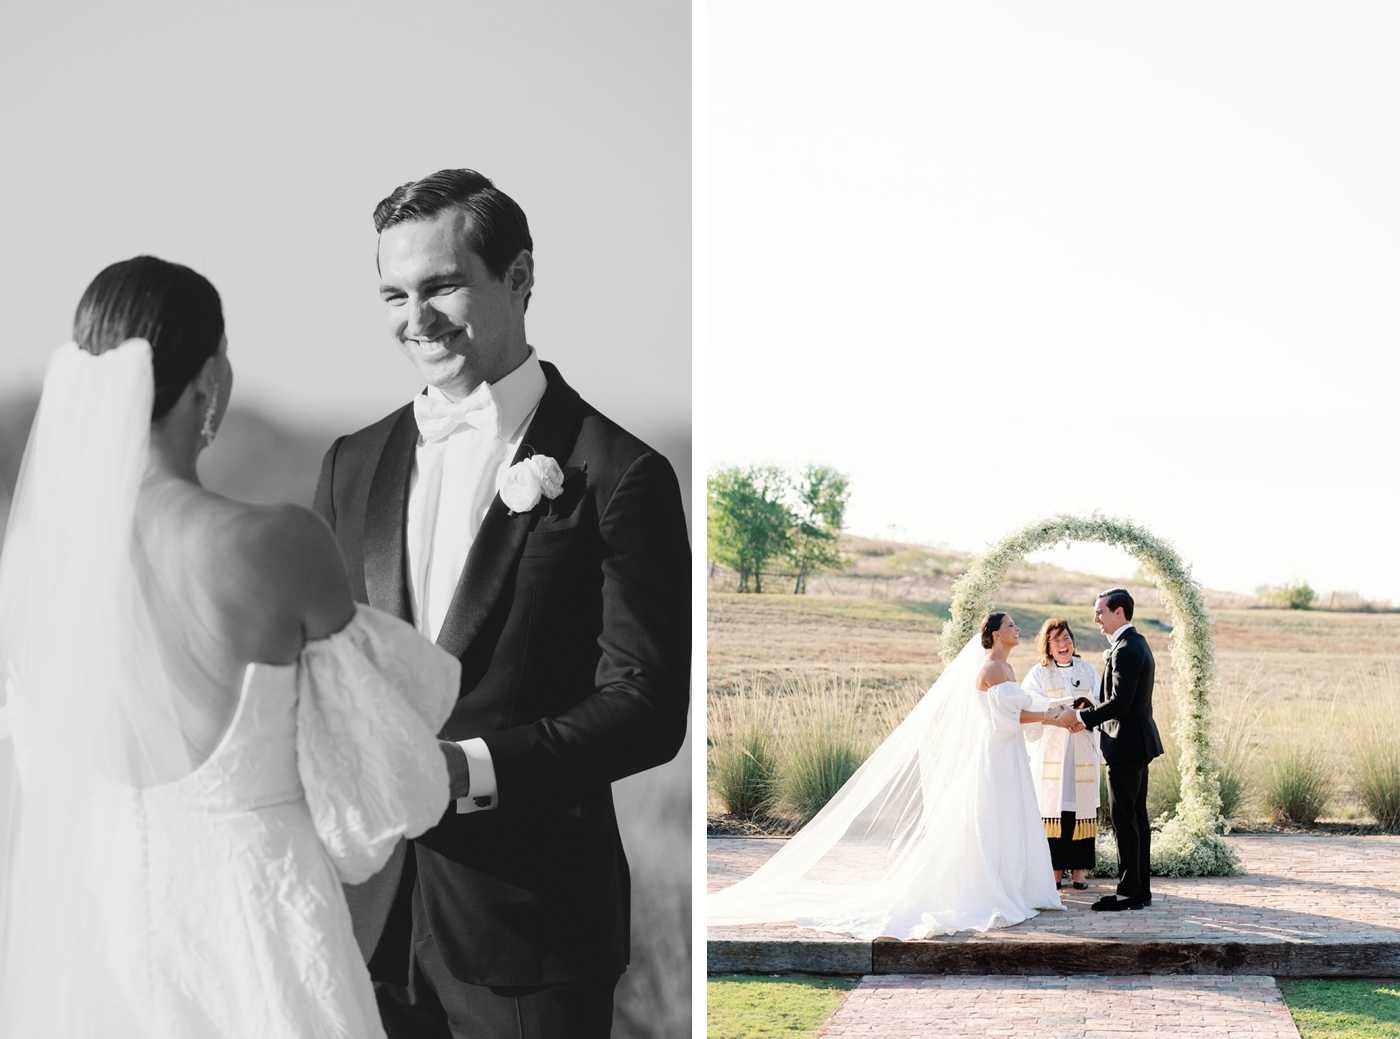 Outdoor ceremony at Two Wishes Ranch with a baby's breath covered ceremony arch